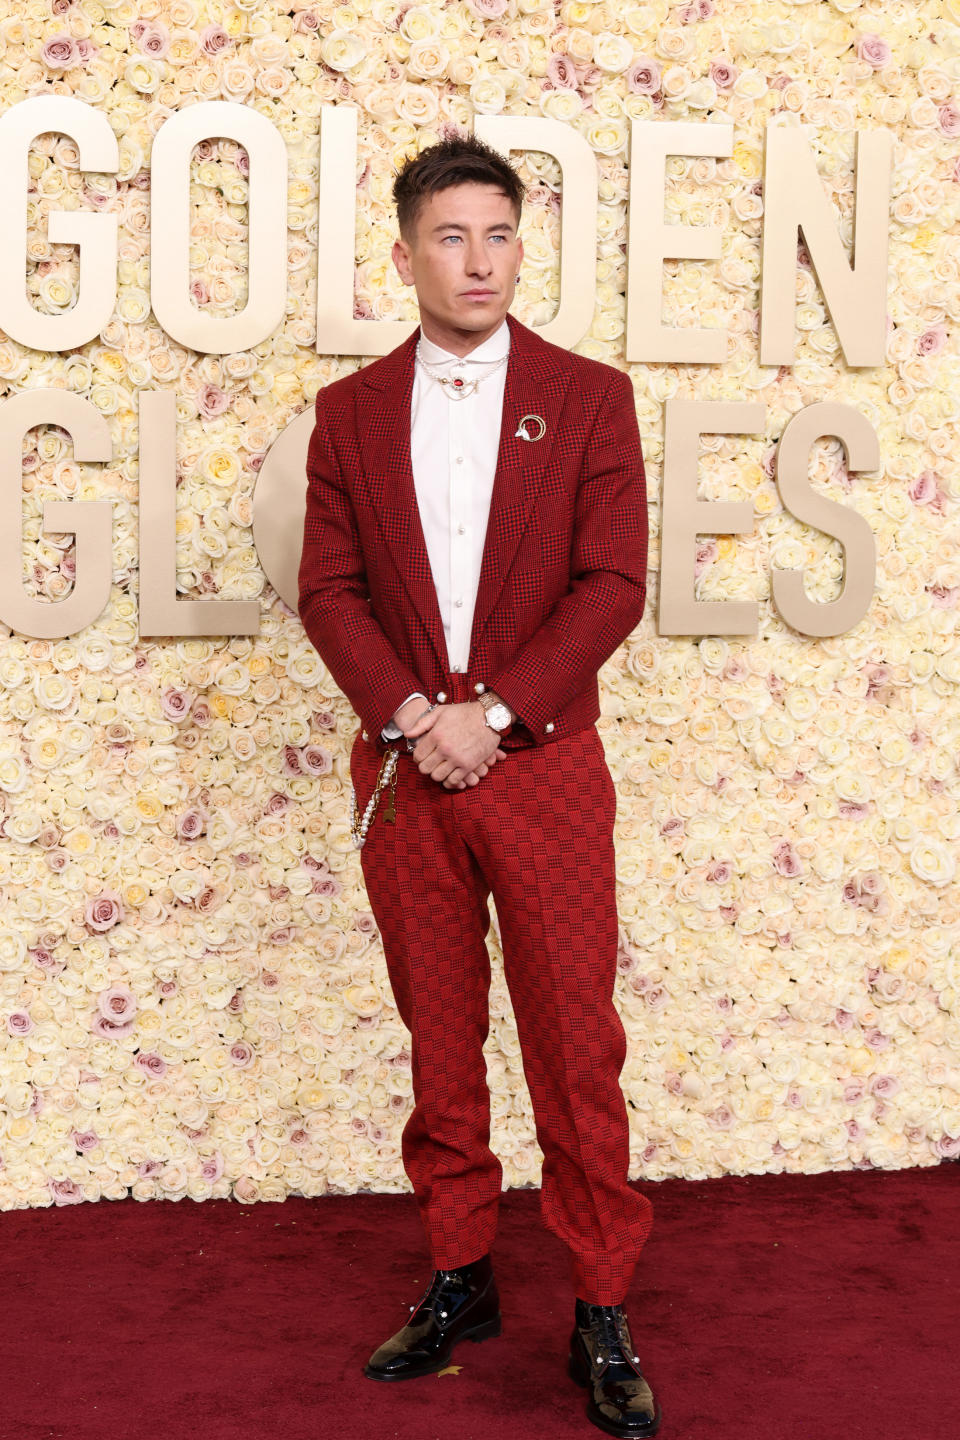 "Saltburn" star Barry Keoghan went against the grain in a patterned red look by Louis Vuitton. (Image via Getty Images)